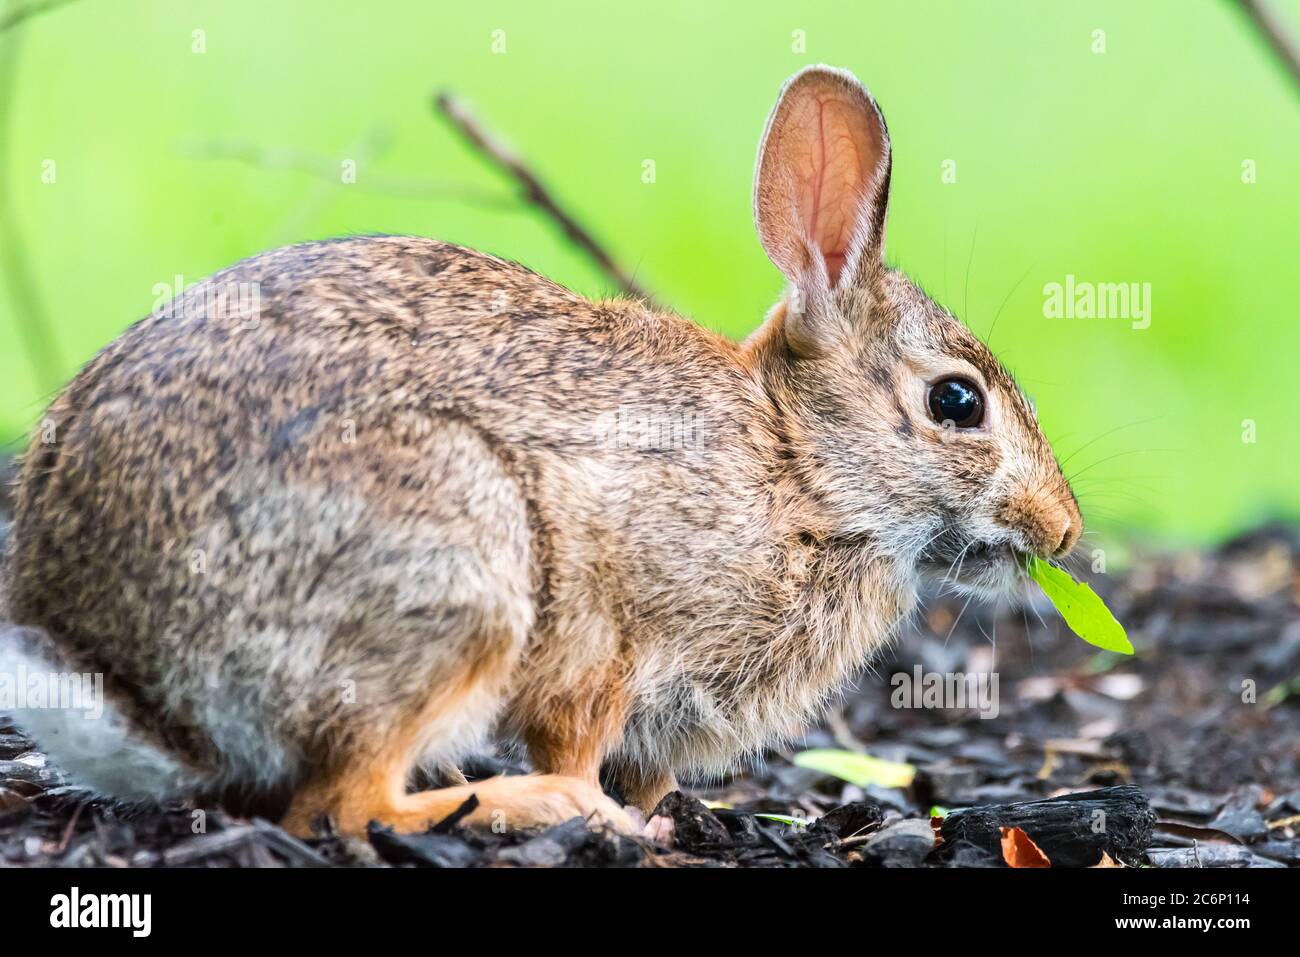 New England Cottontail munching on a leaf. Stock Photo